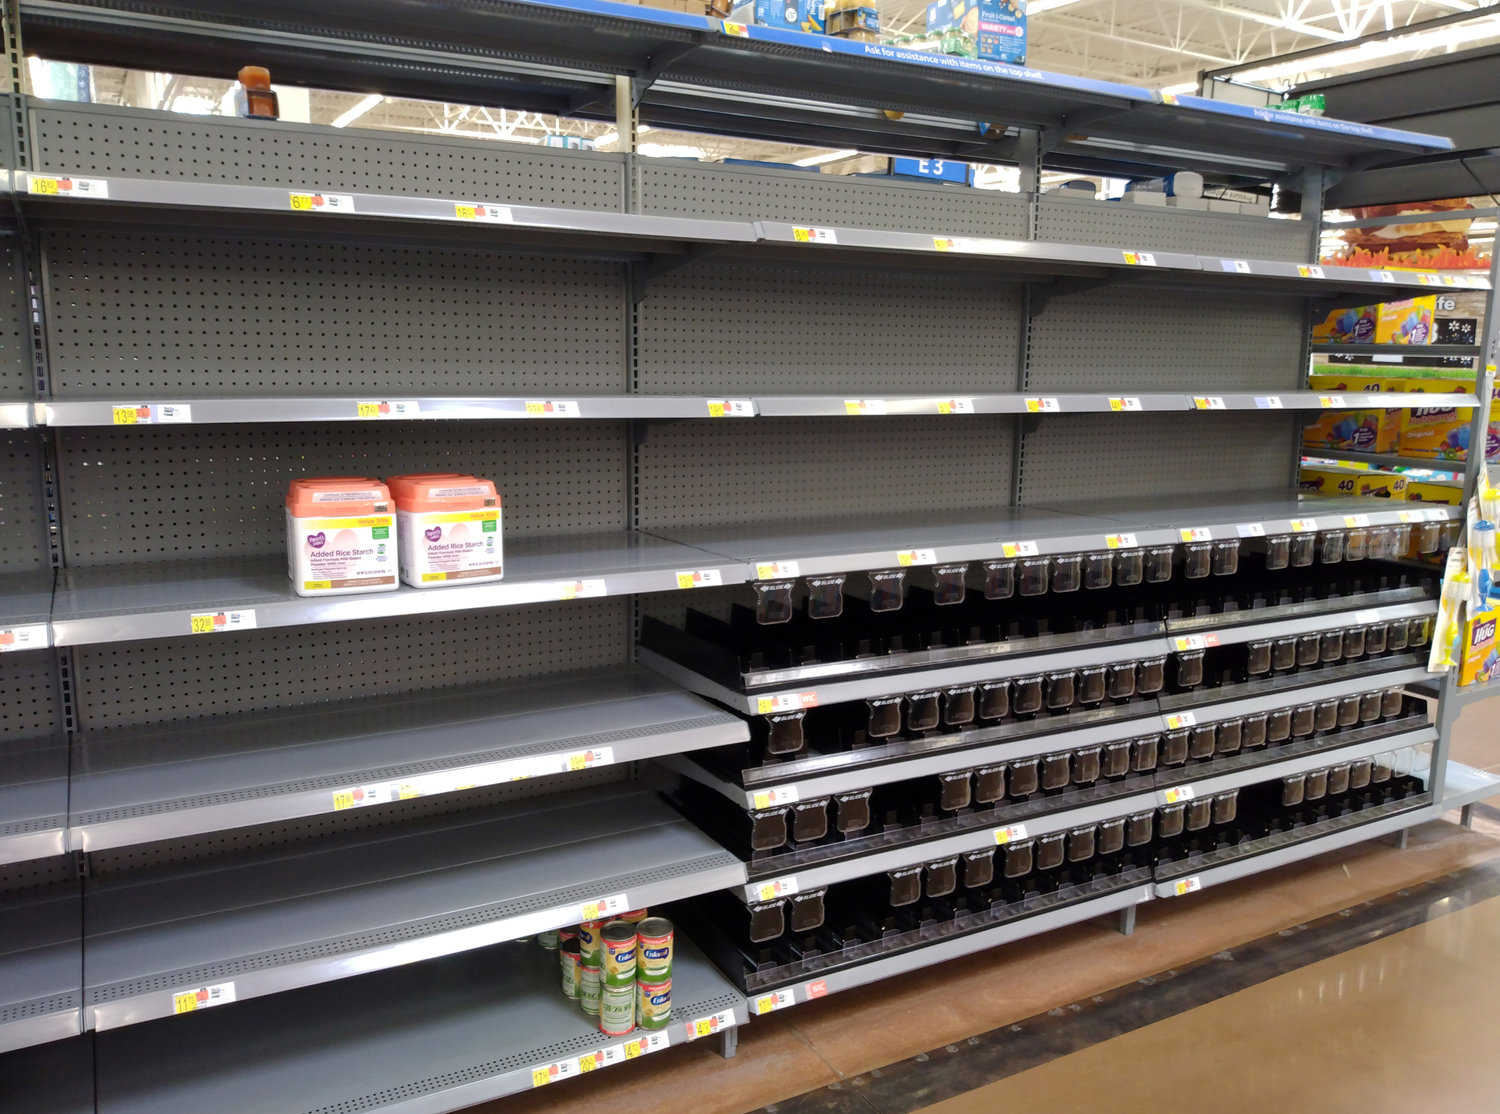 Shelves for baby formula site almost completely empty May 14, 2022, at a Walmart store in Dallas, Ga. Parents seeking baby formula are running into bare supermarket and pharmacy shelves in part because of ongoing supply disruptions and a recent safety recall. (Index/Henry Durand)